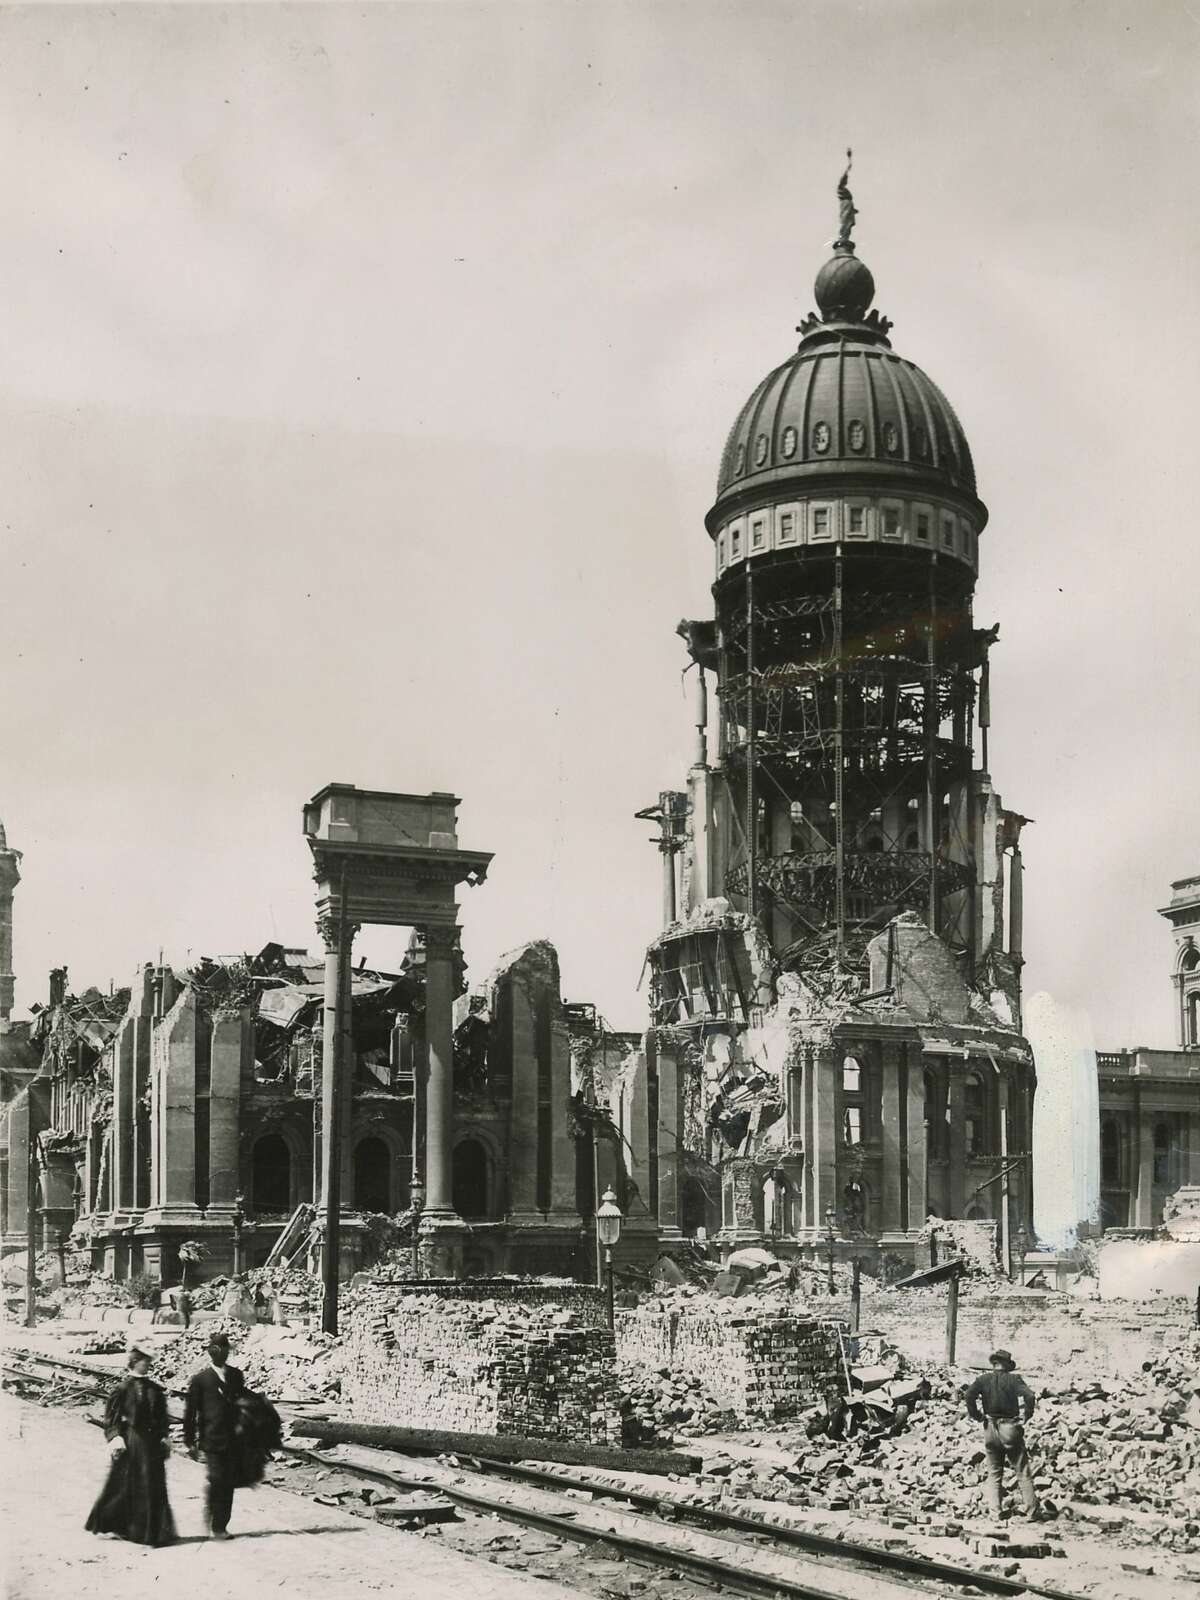 San Francisco City Hall in the aftermath of the 1906 earthquake and fire.